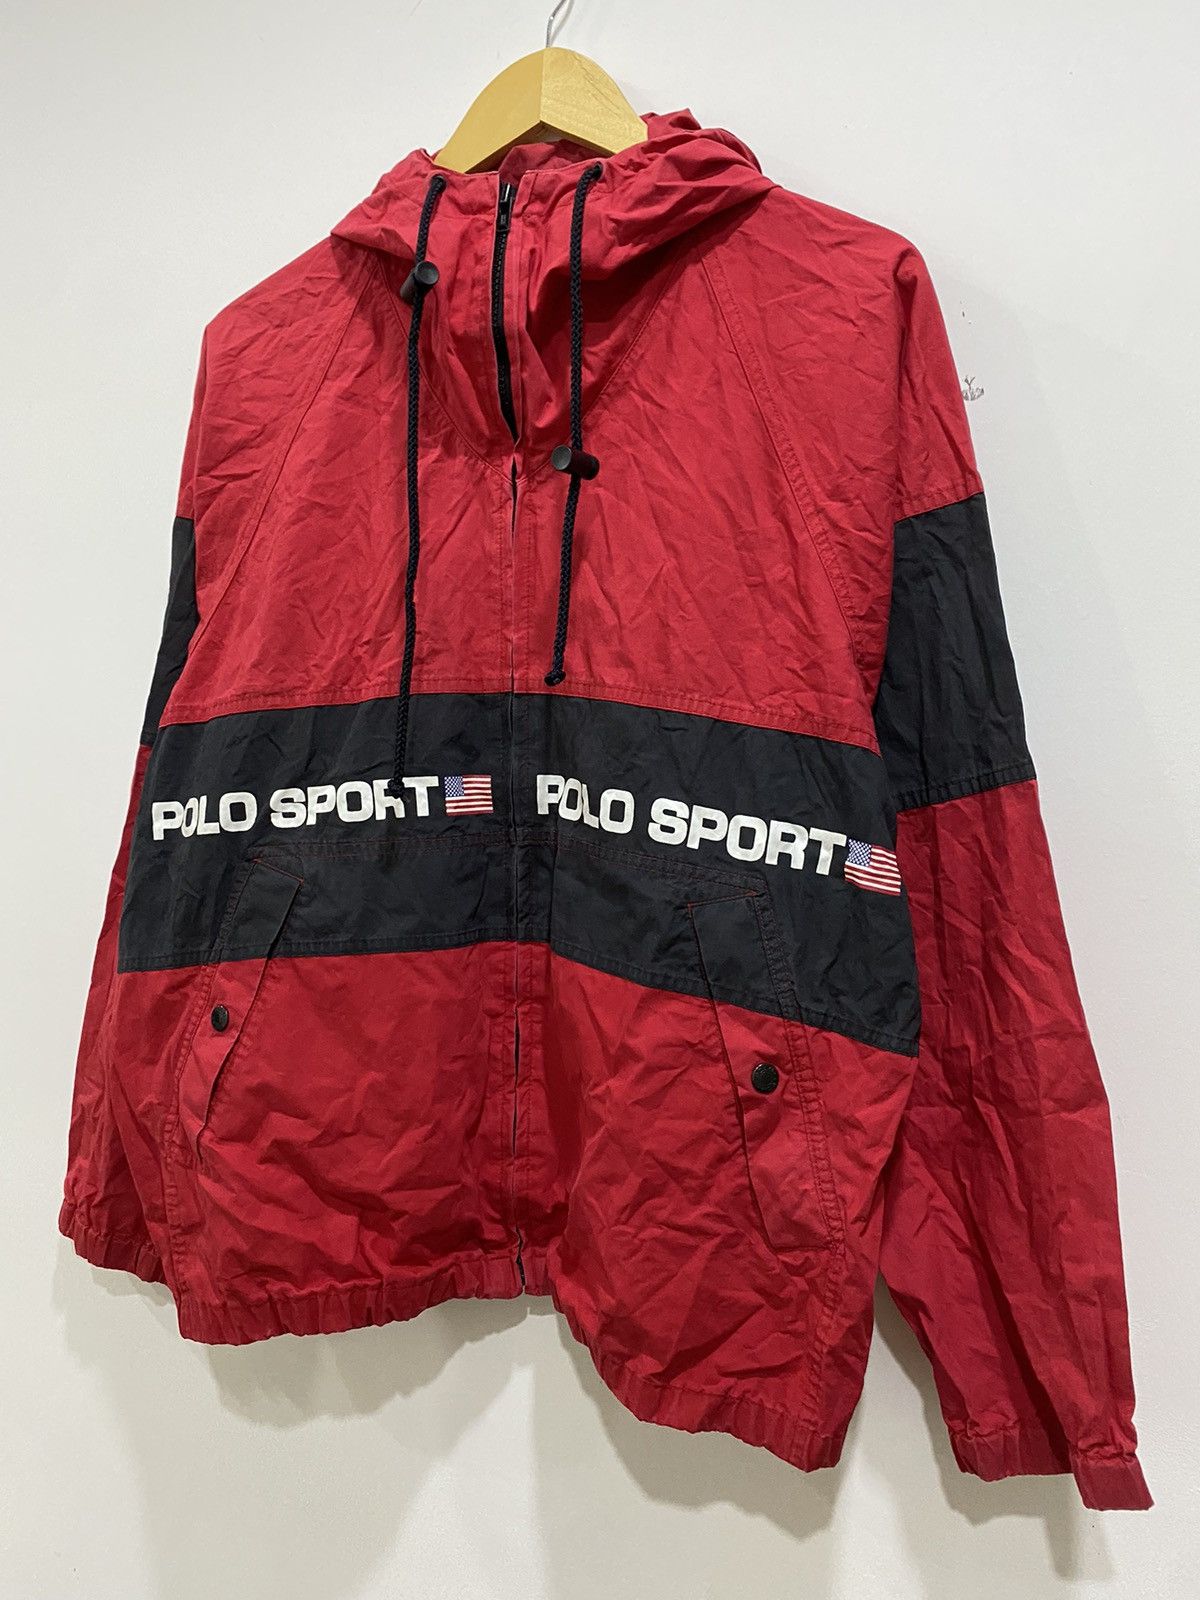 Vintage Polo Sport Ralph Lauren Spell Out Jacket - 14